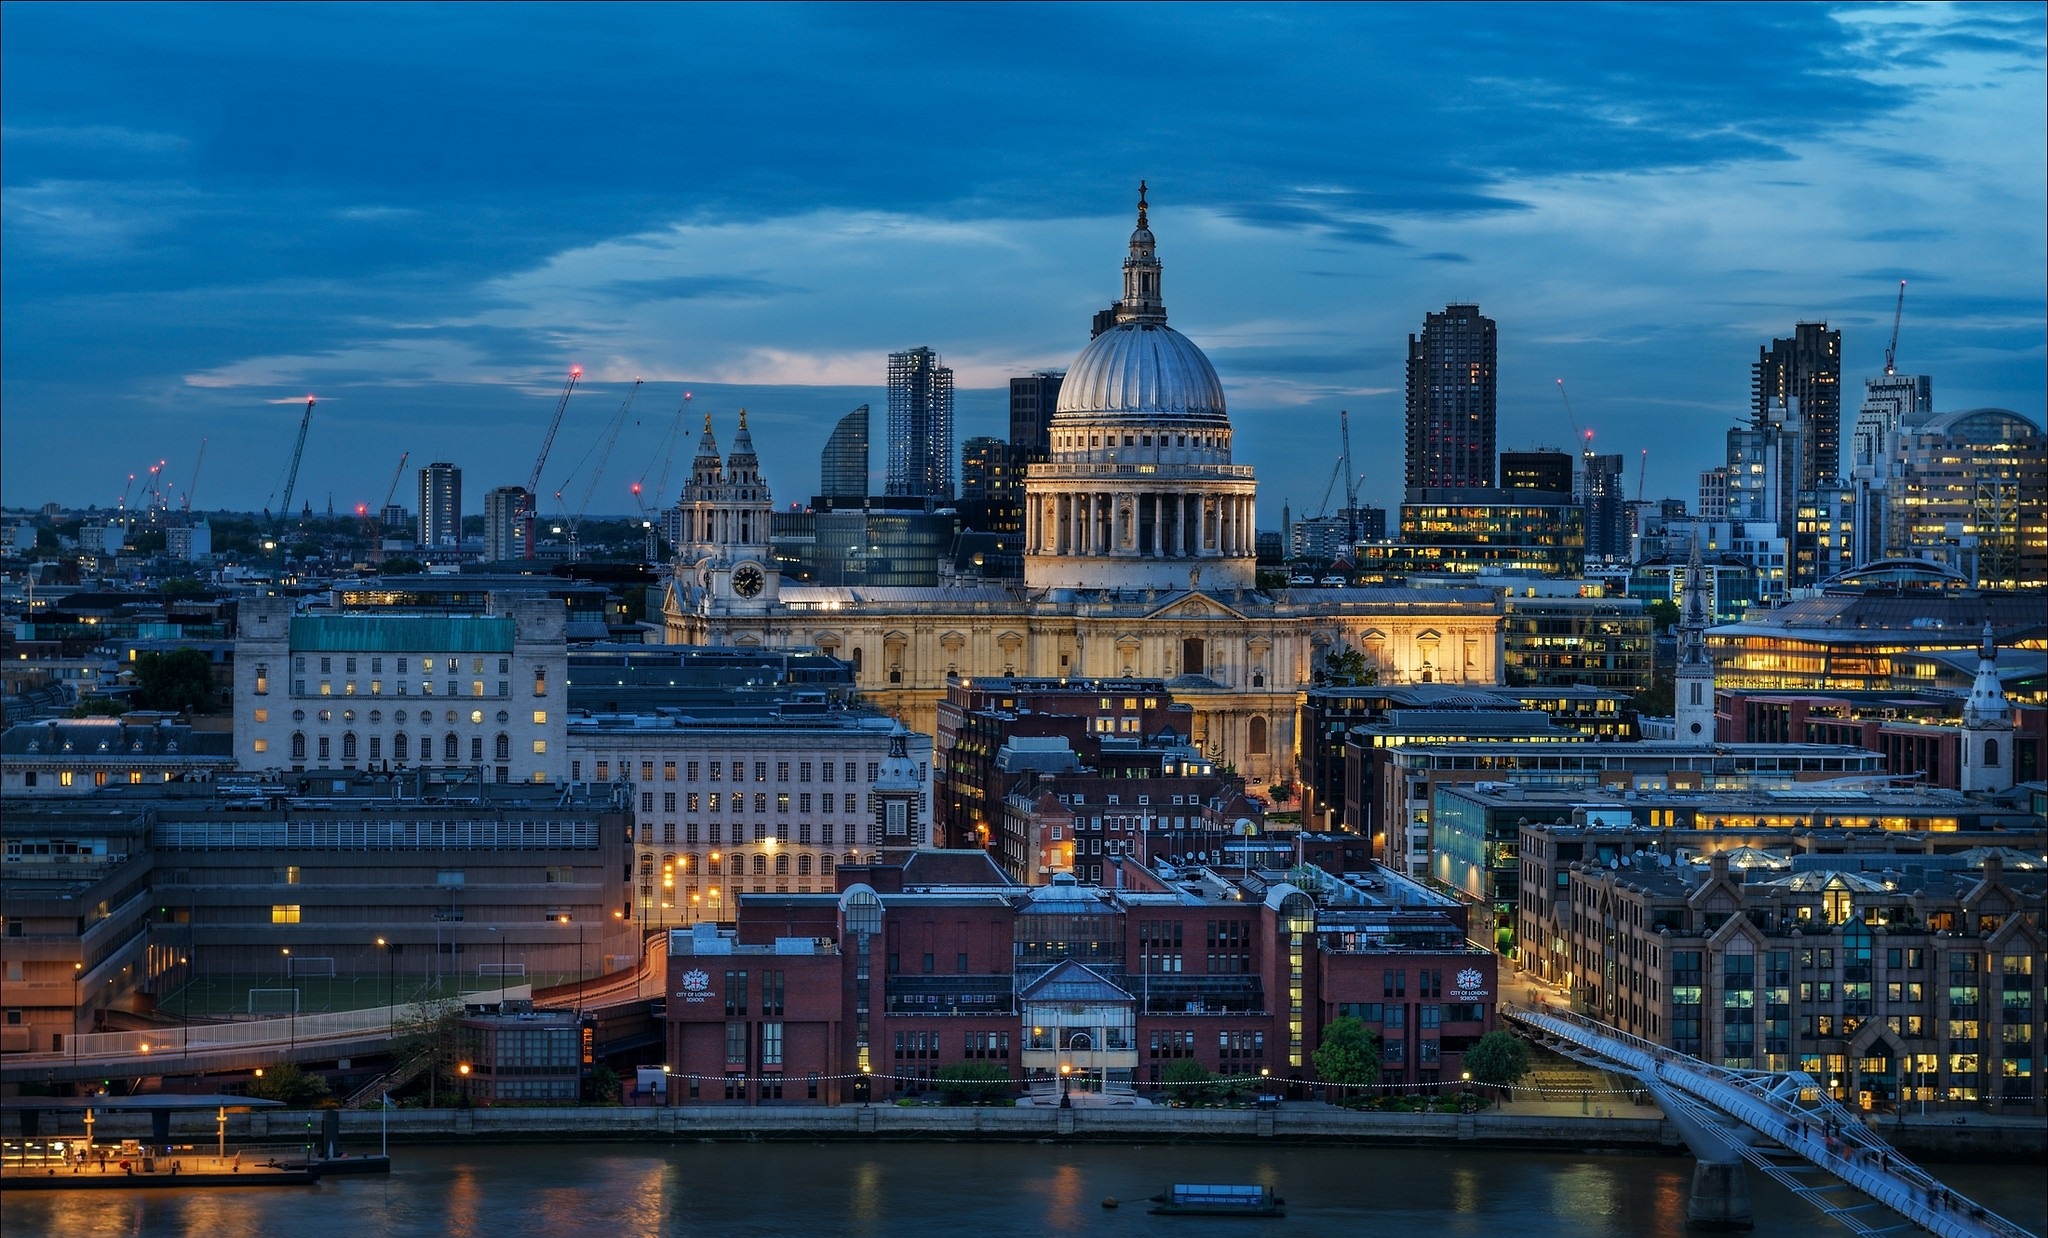 united kingdom, man made, london, st paul's cathedral, cities